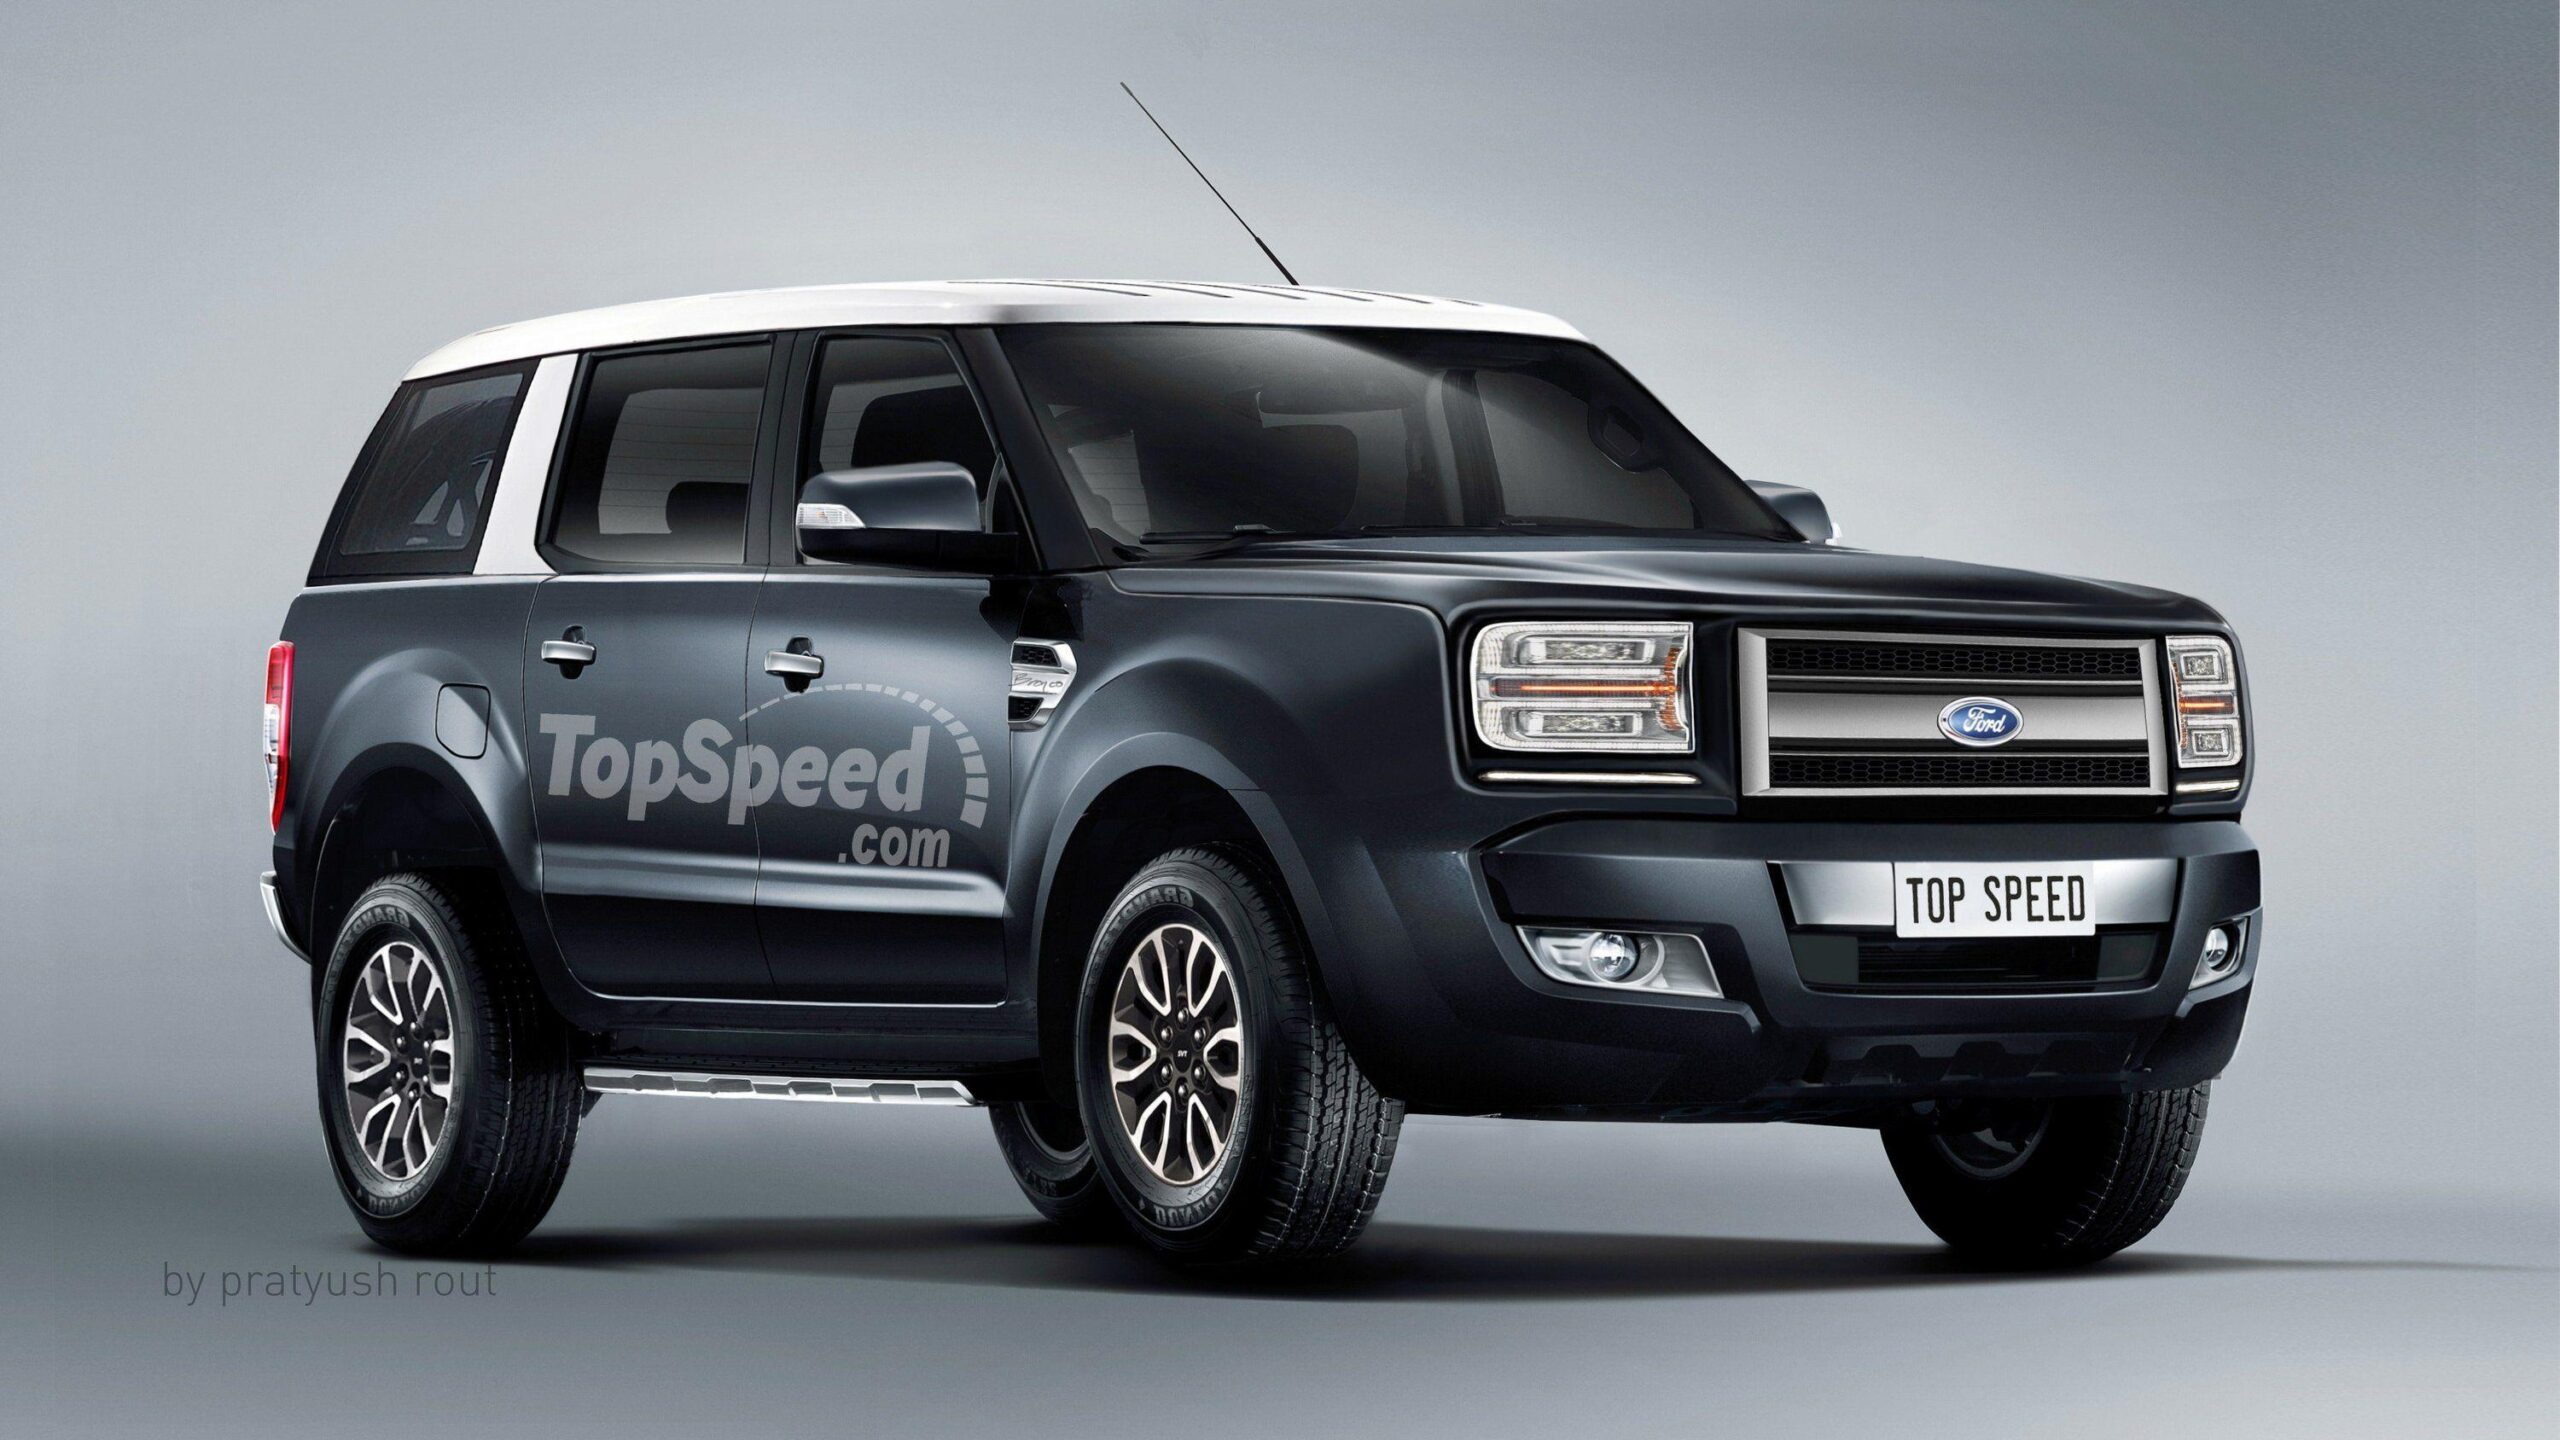 Ford Bronco Pictures, Photos, Wallpapers